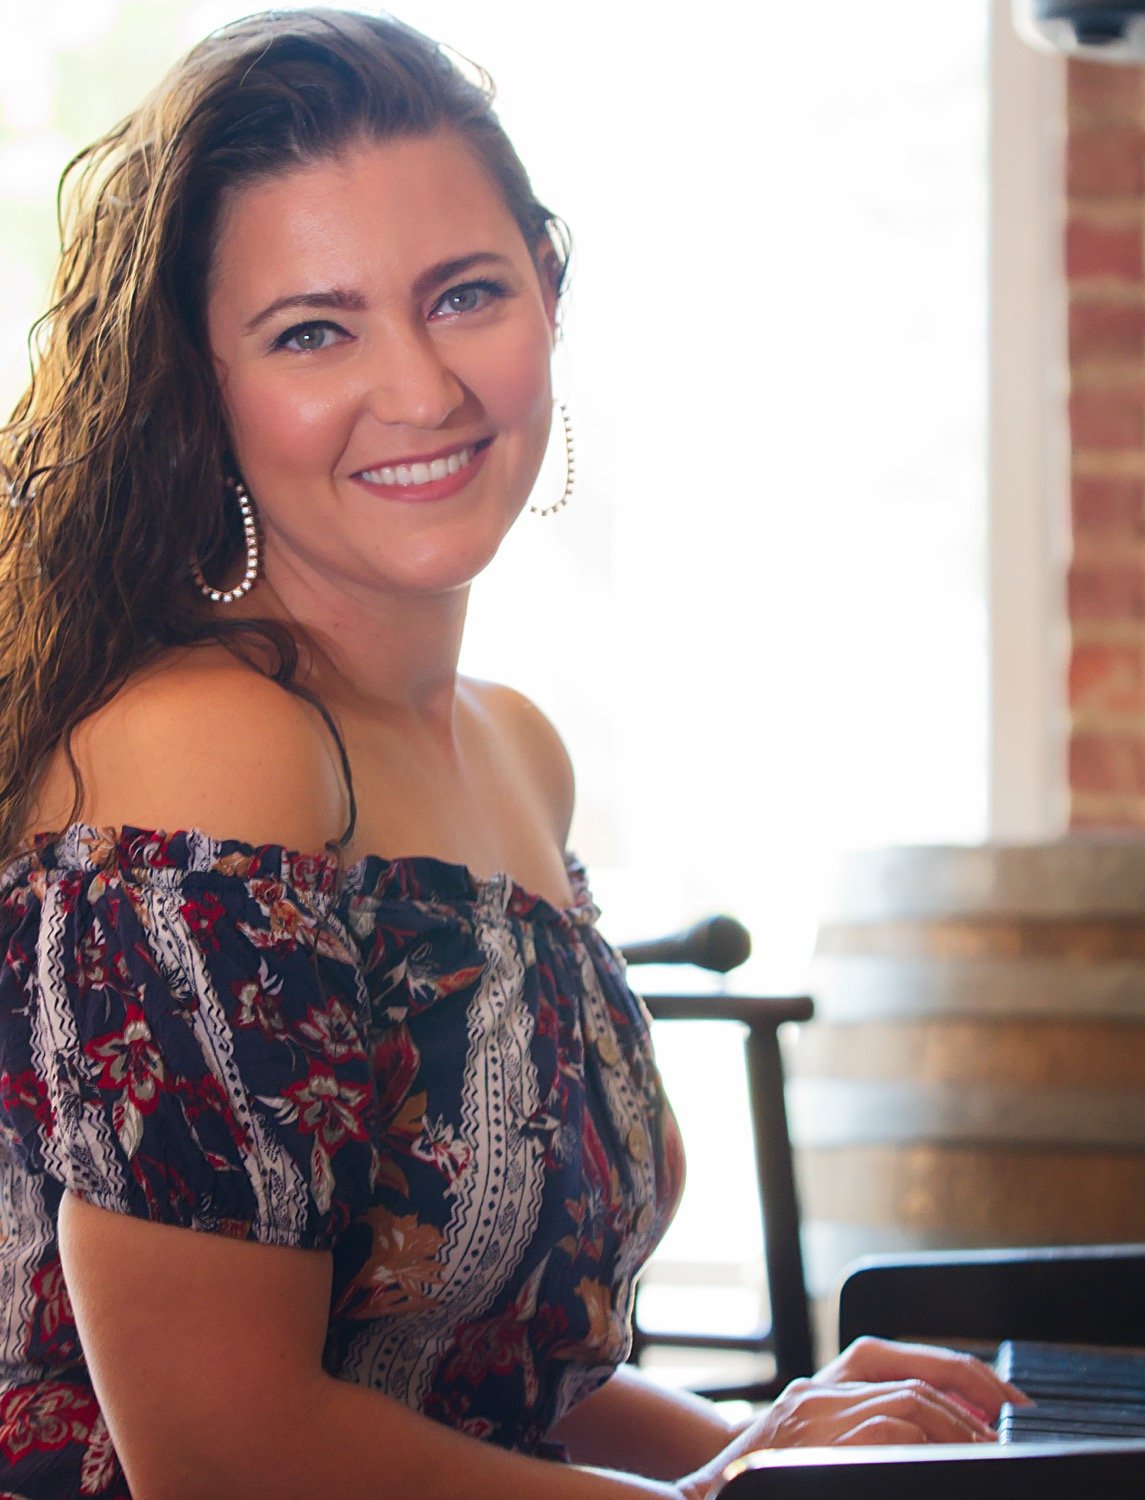 Jennifer Pisarcik of Mineola has made a career of singing and songwriting.